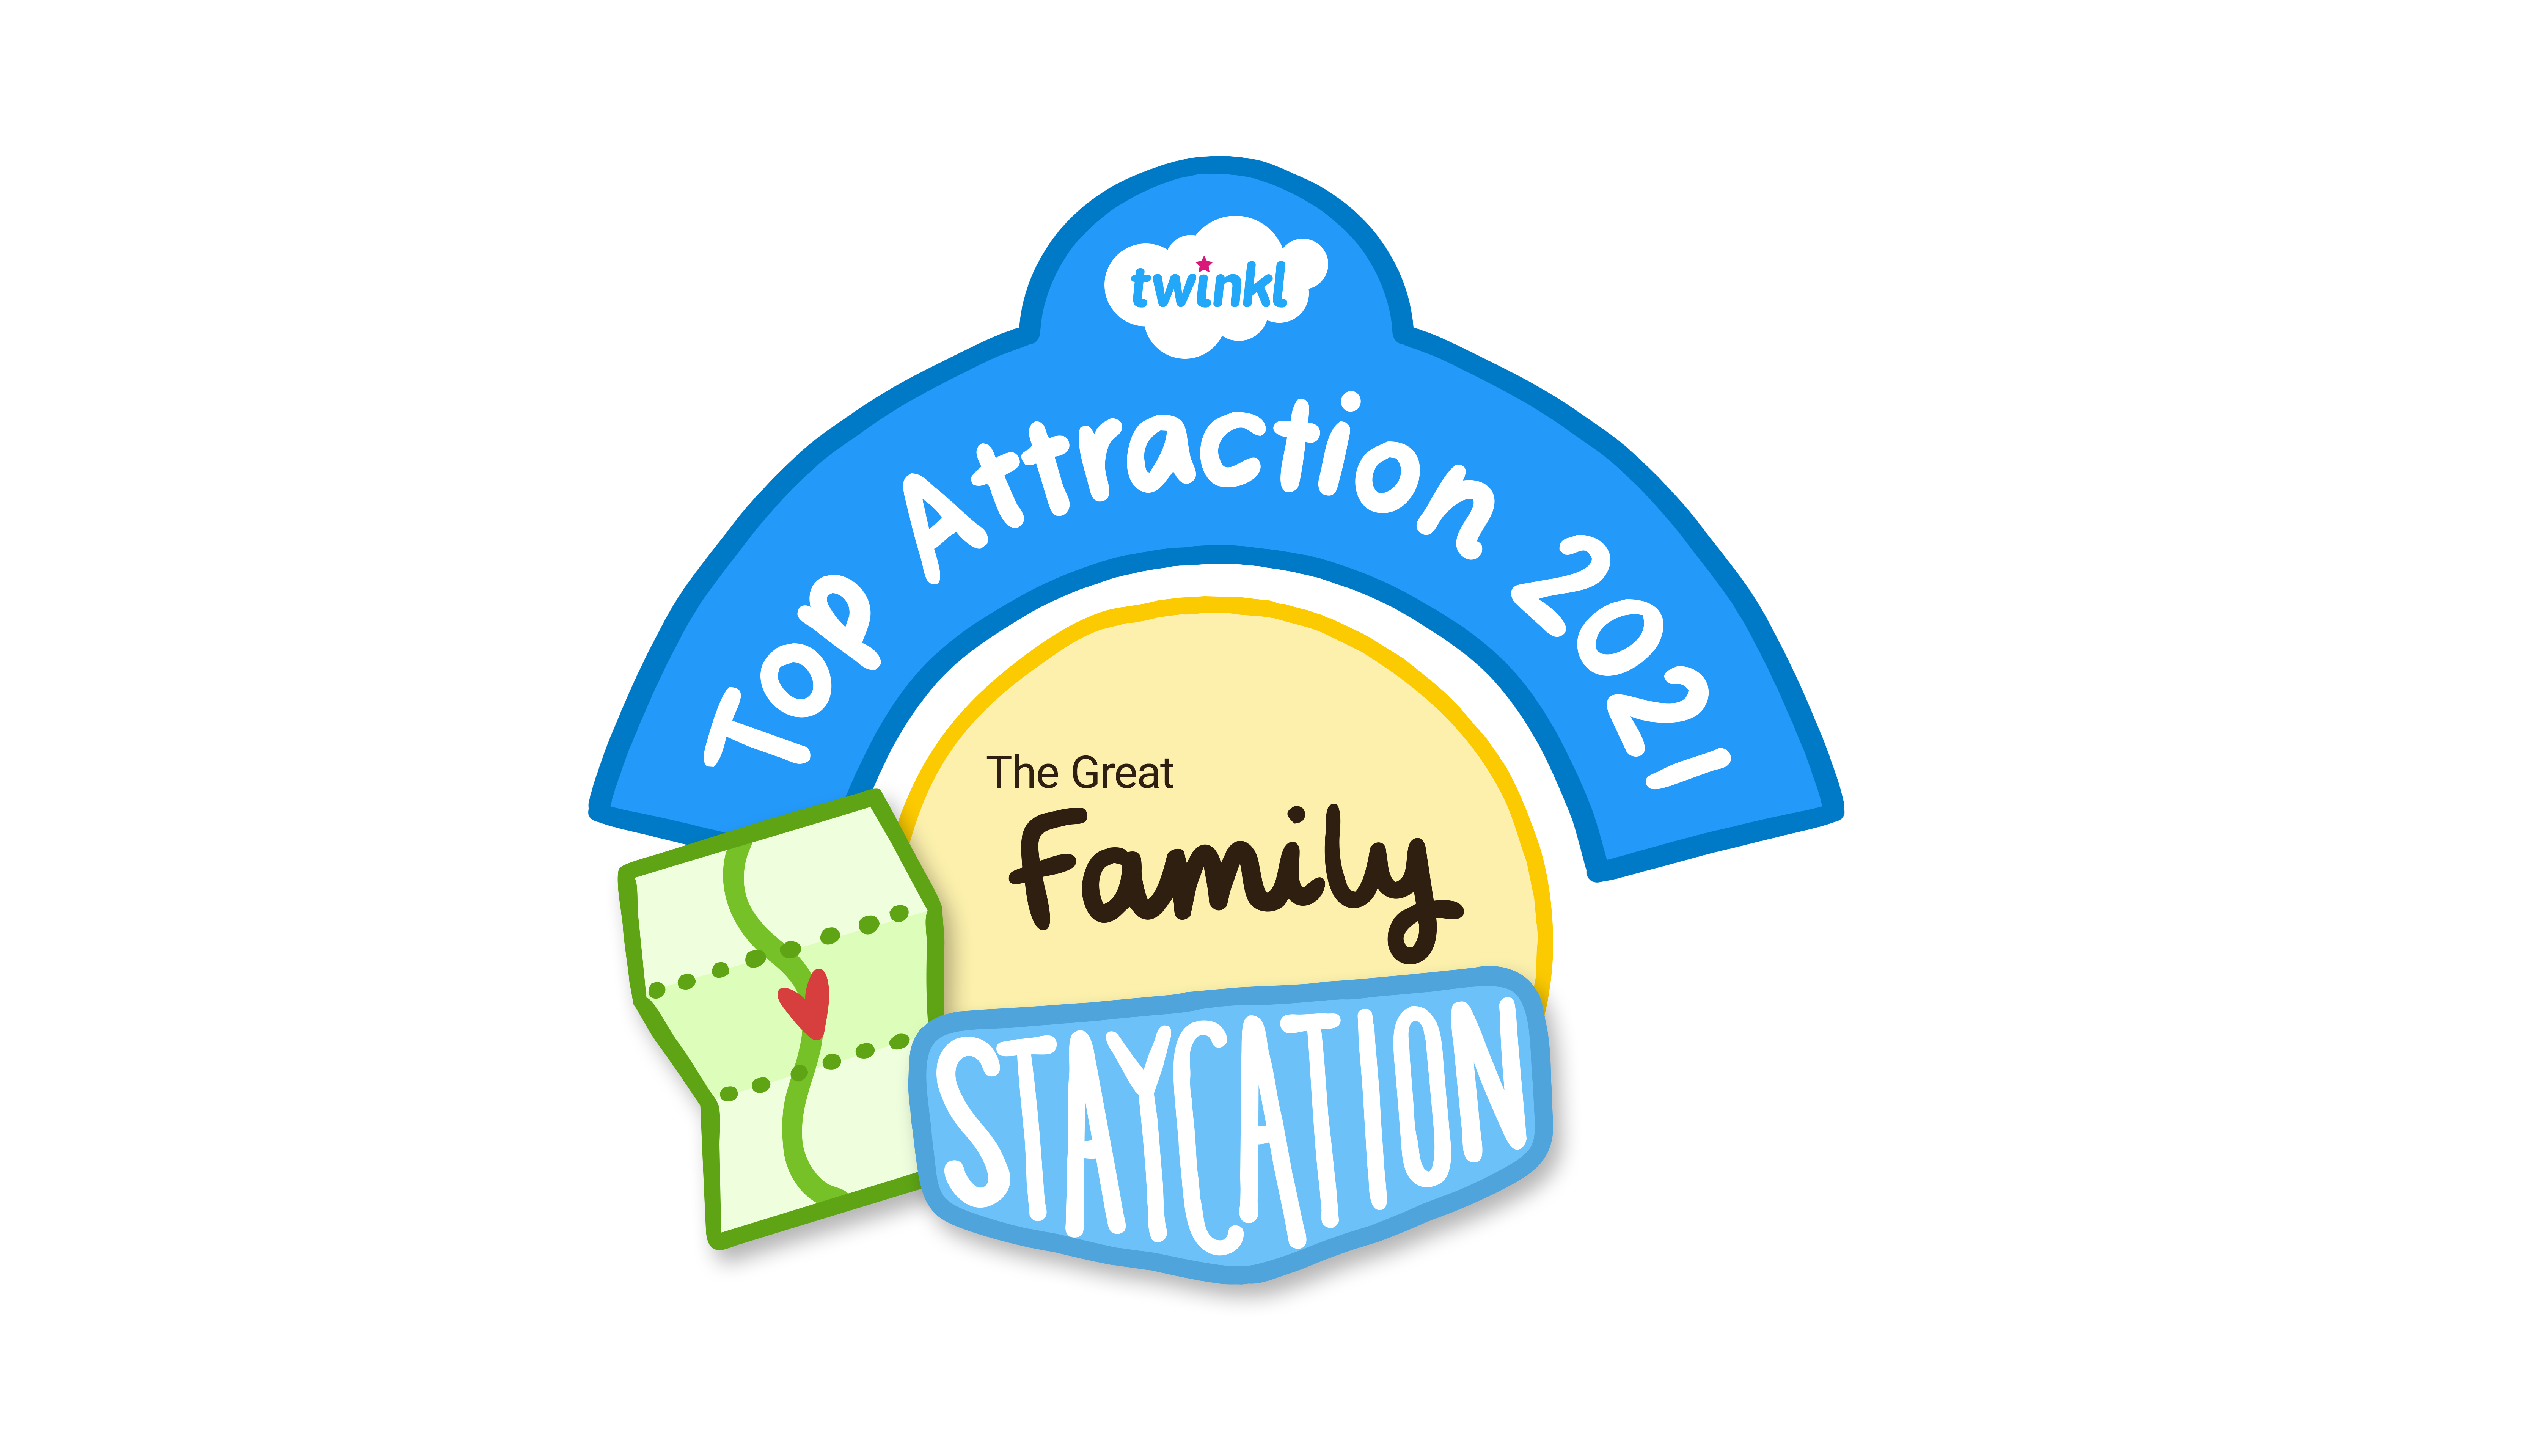 Twinkl - Staycation top attraction badge